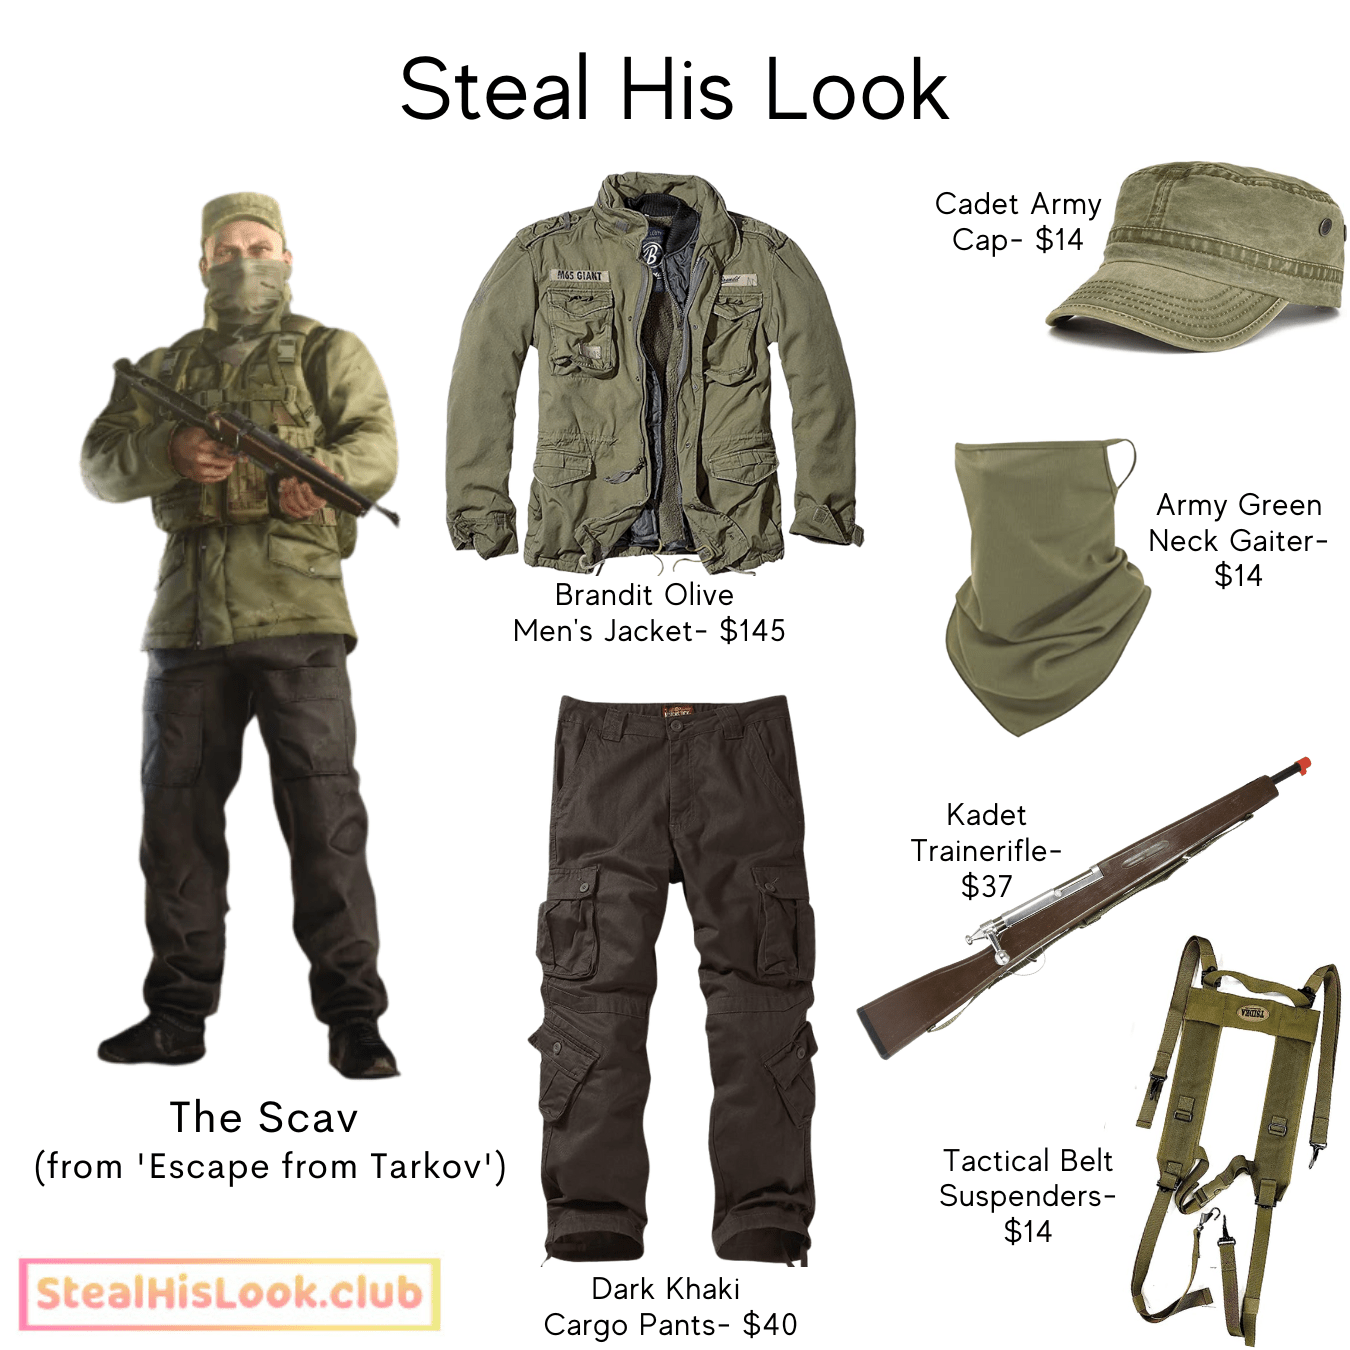 Steal His Look: The-Scav-from-Escape-from-Tarkov